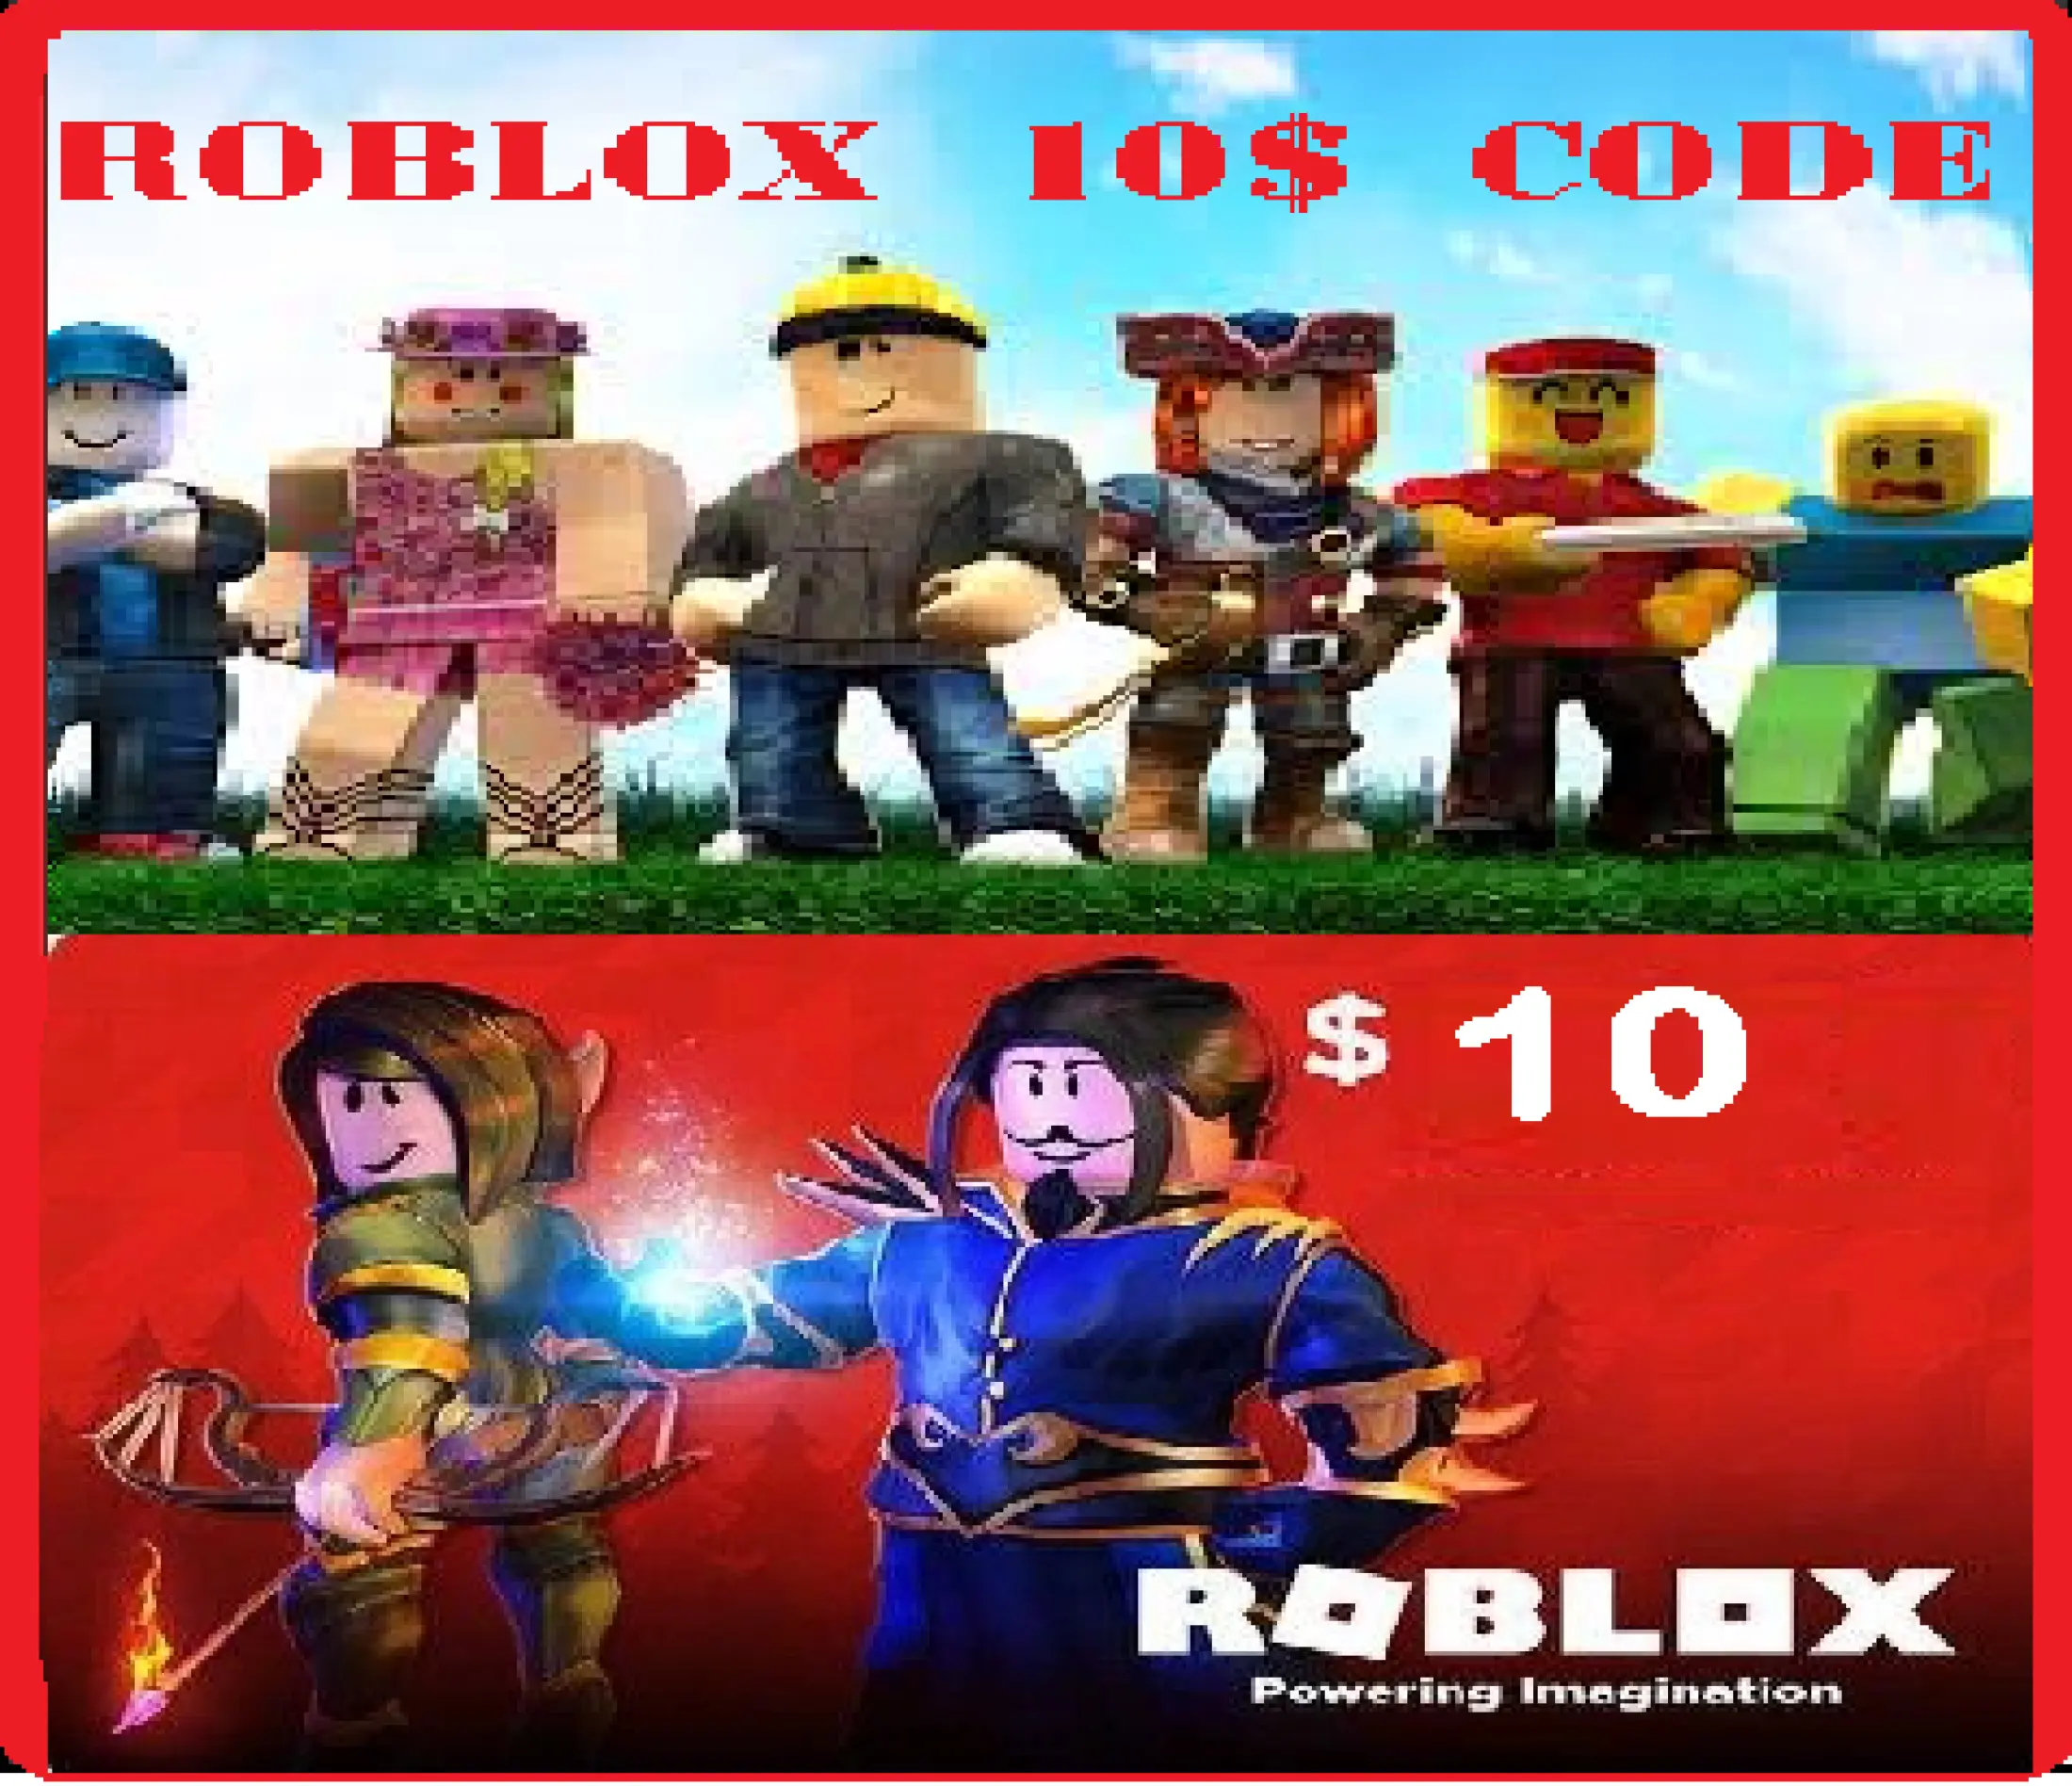 10 Roblox Code Use To Buy Robux Or Premium In Roblox Lazada Ph - how to biy robux